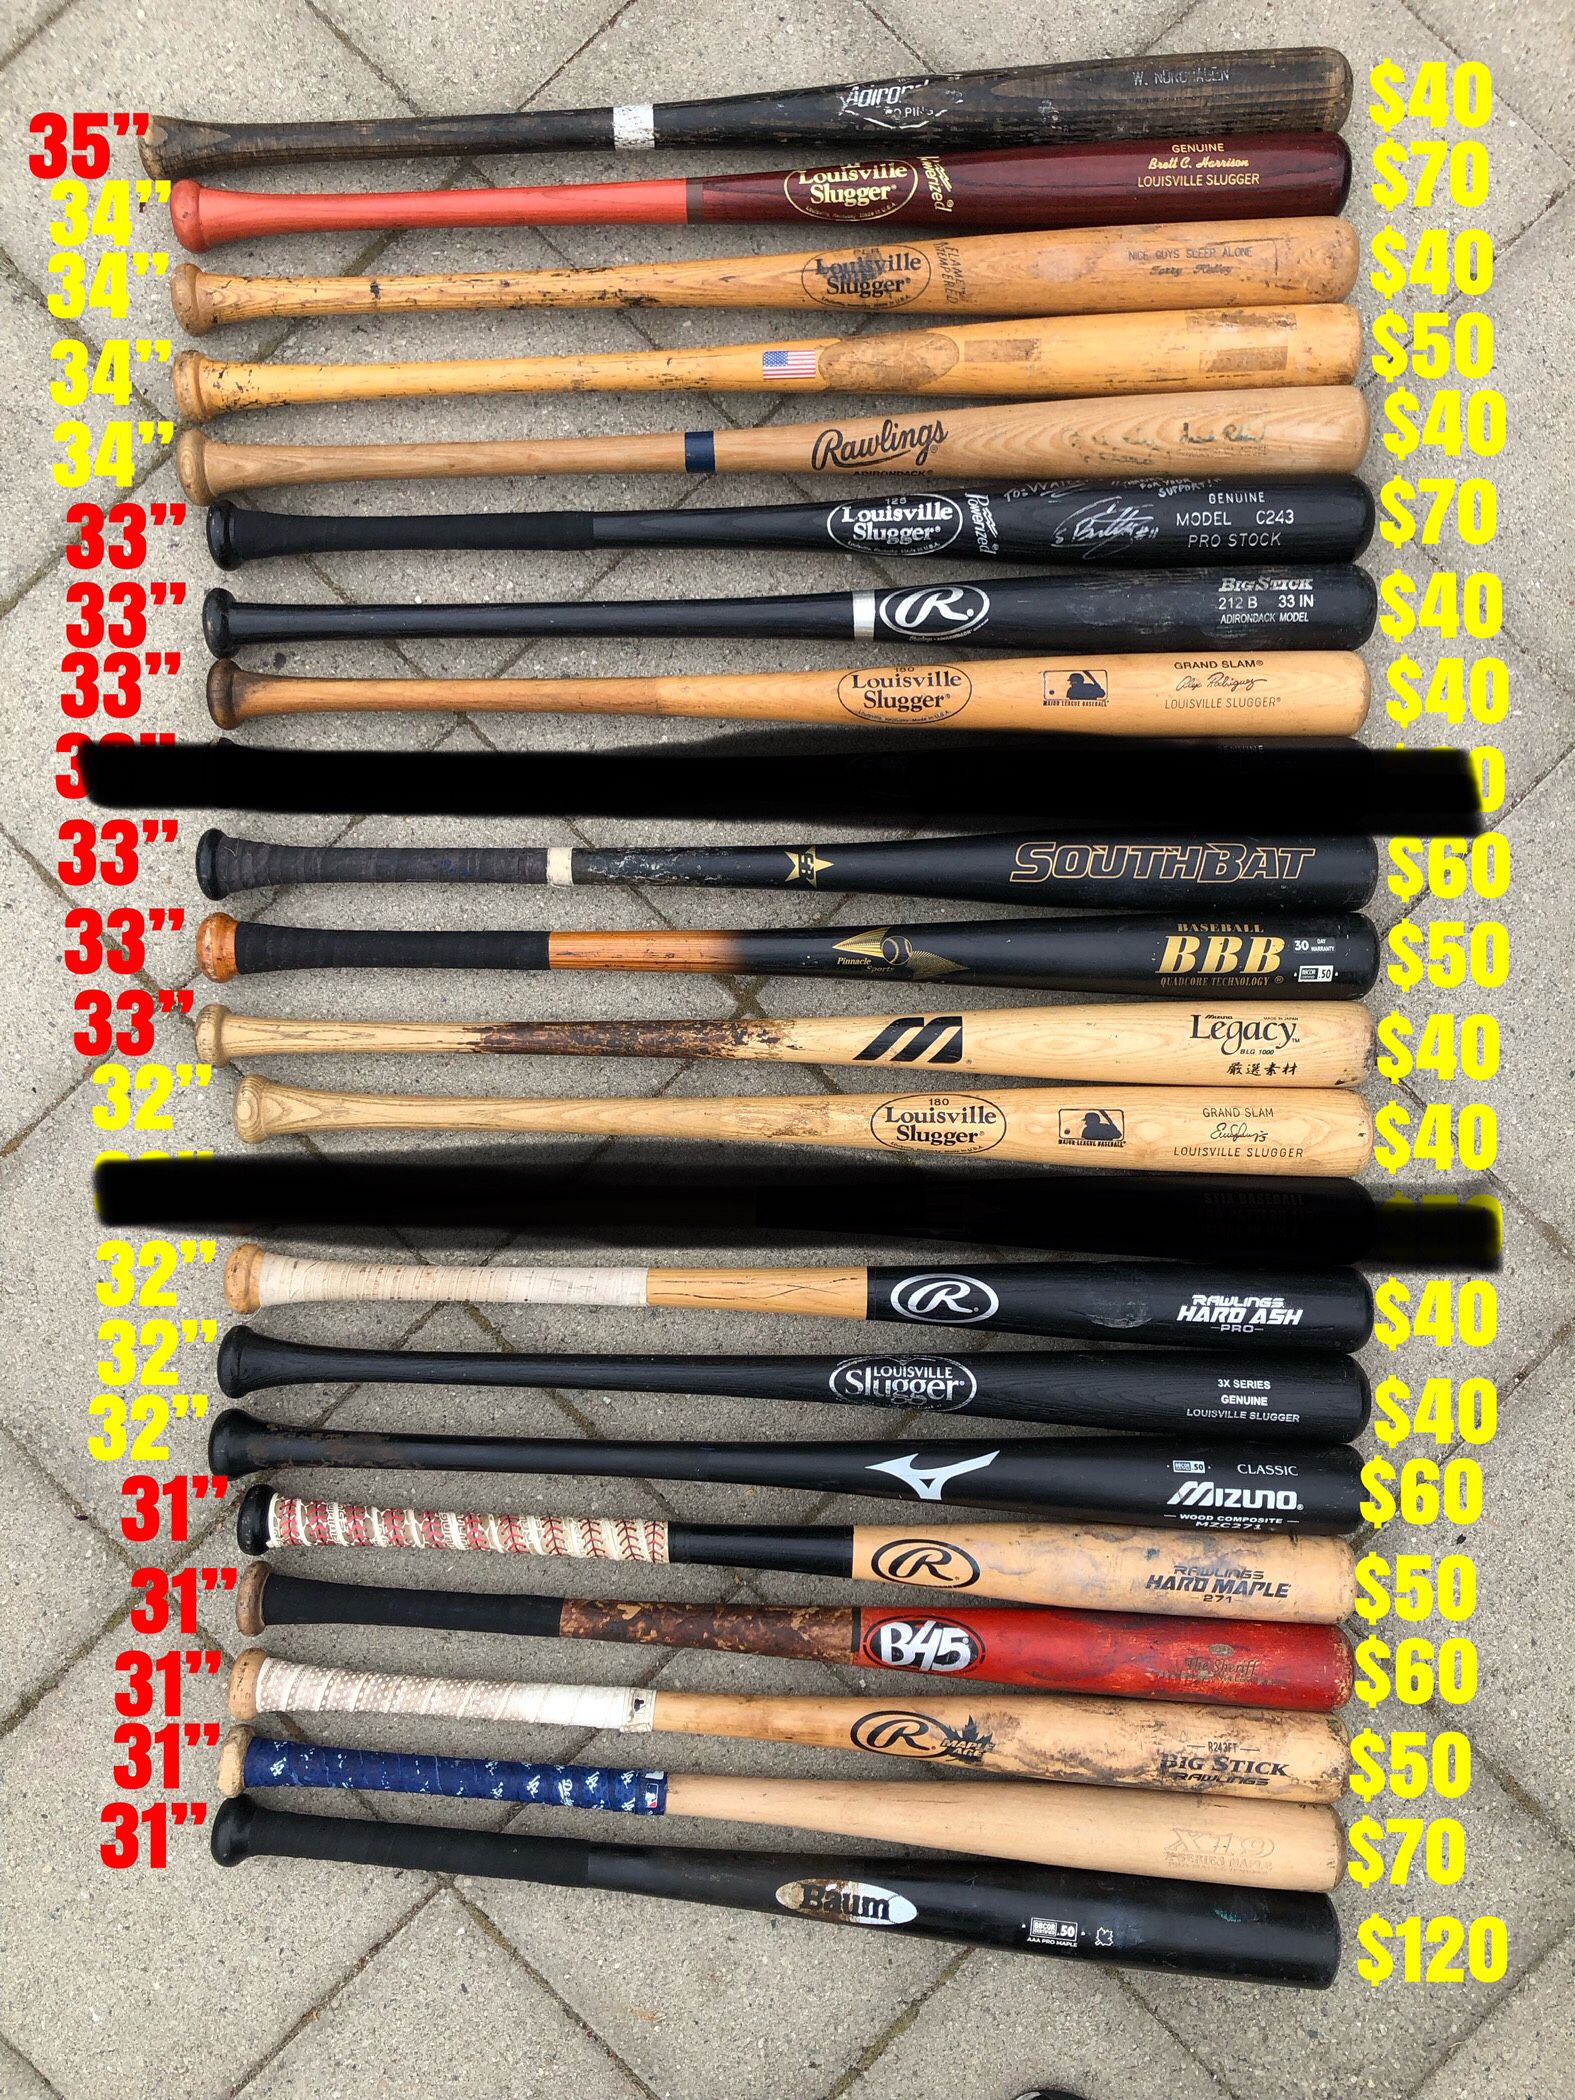 Baseball Wood Bats Sizes And Prices Are Labeled In The Picture Have More Baseball And Softball Equipment Available 